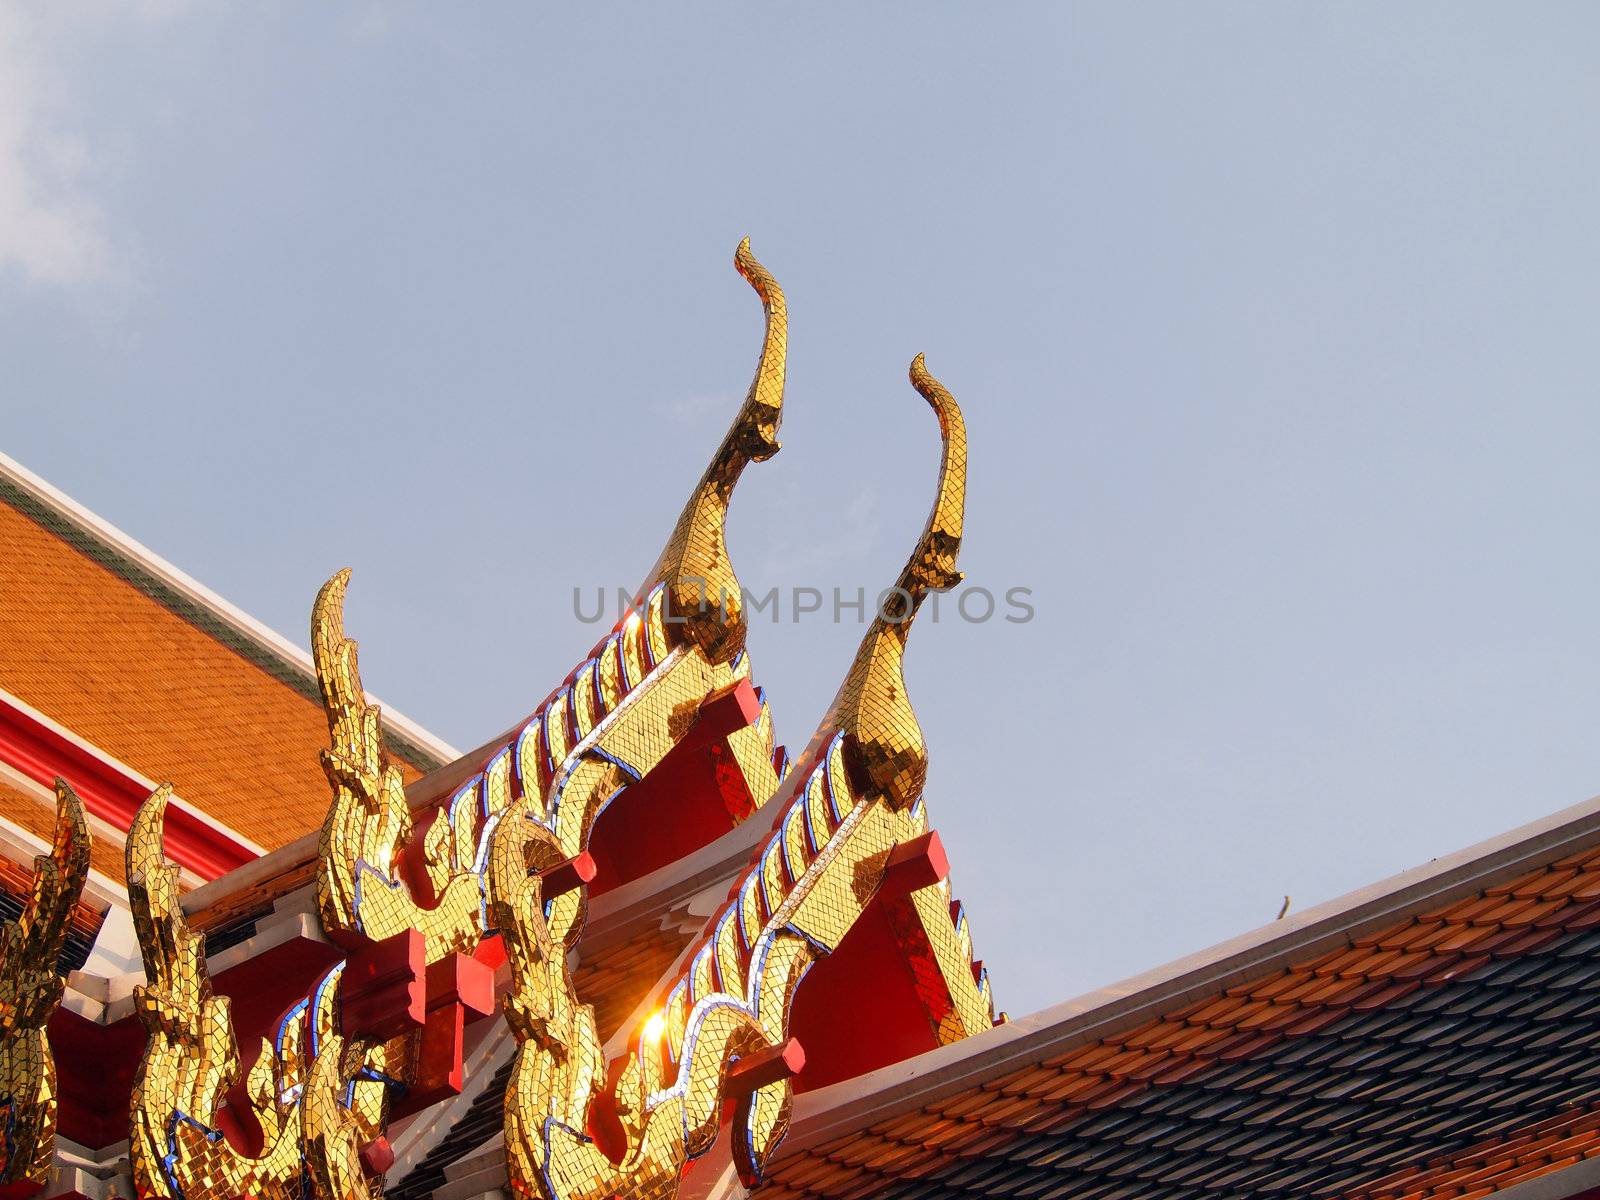 Temple roof in wat pho temple, Bangkok, Thailand       